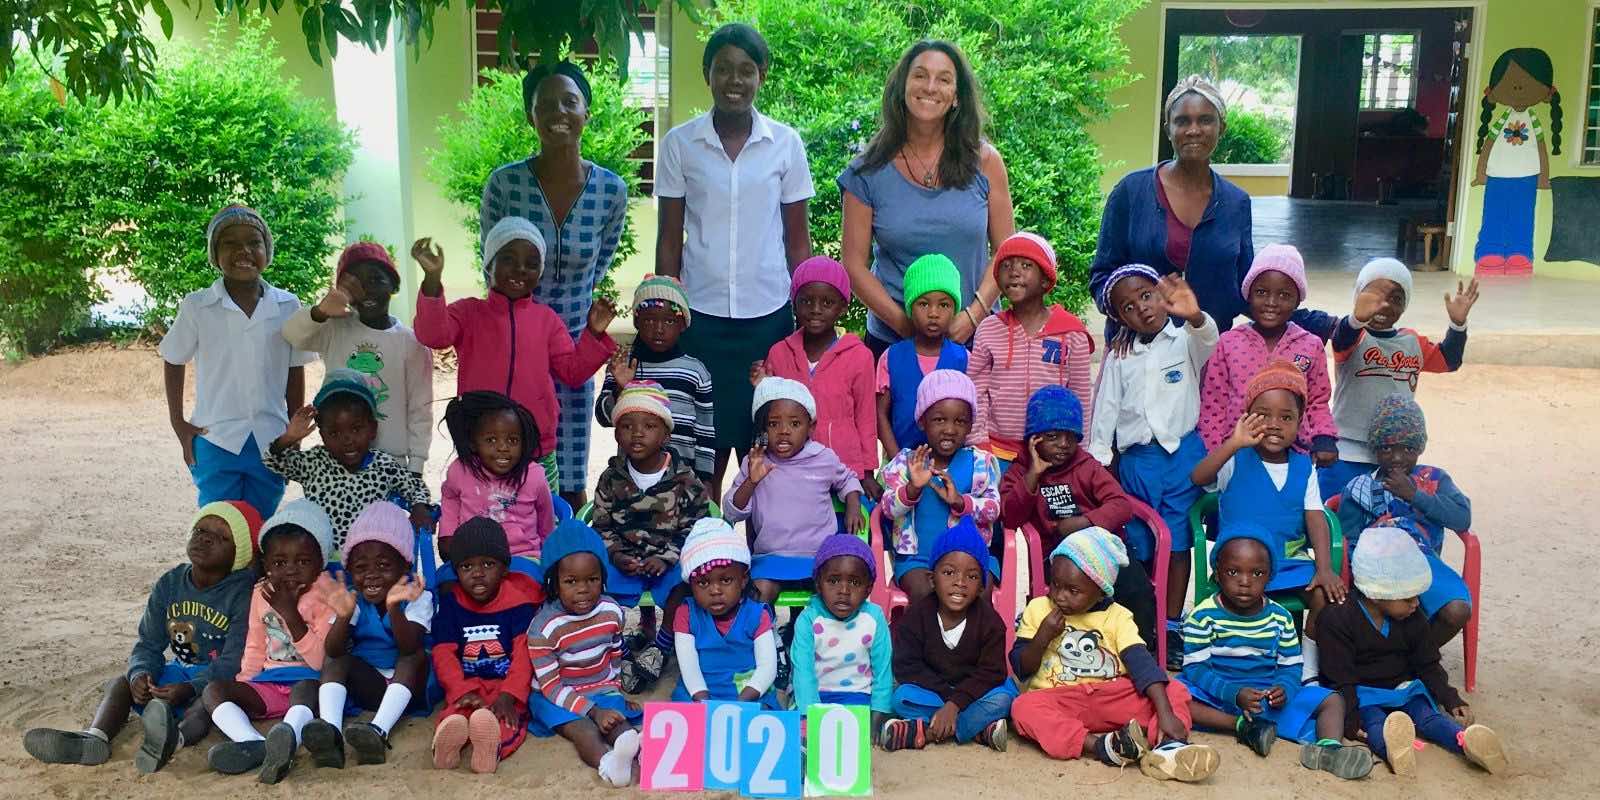 group photo of an intern with children and adults in South Africa